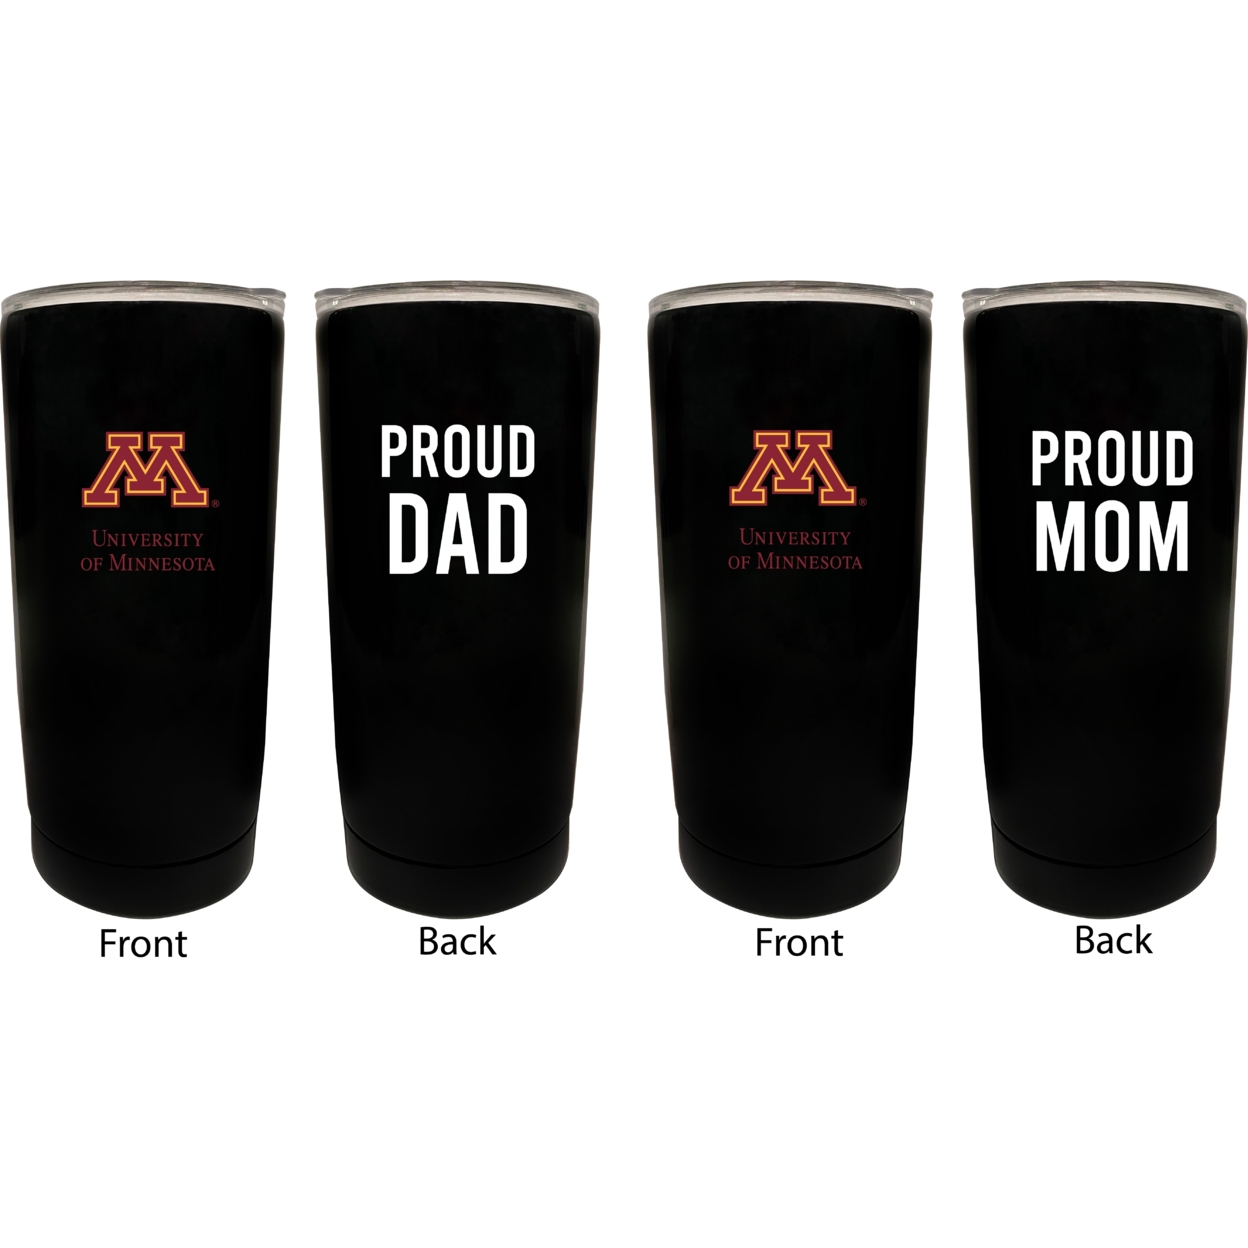 Minnesota Gophers Proud Mom And Dad 16 Oz Insulated Stainless Steel Tumblers 2 Pack Black.